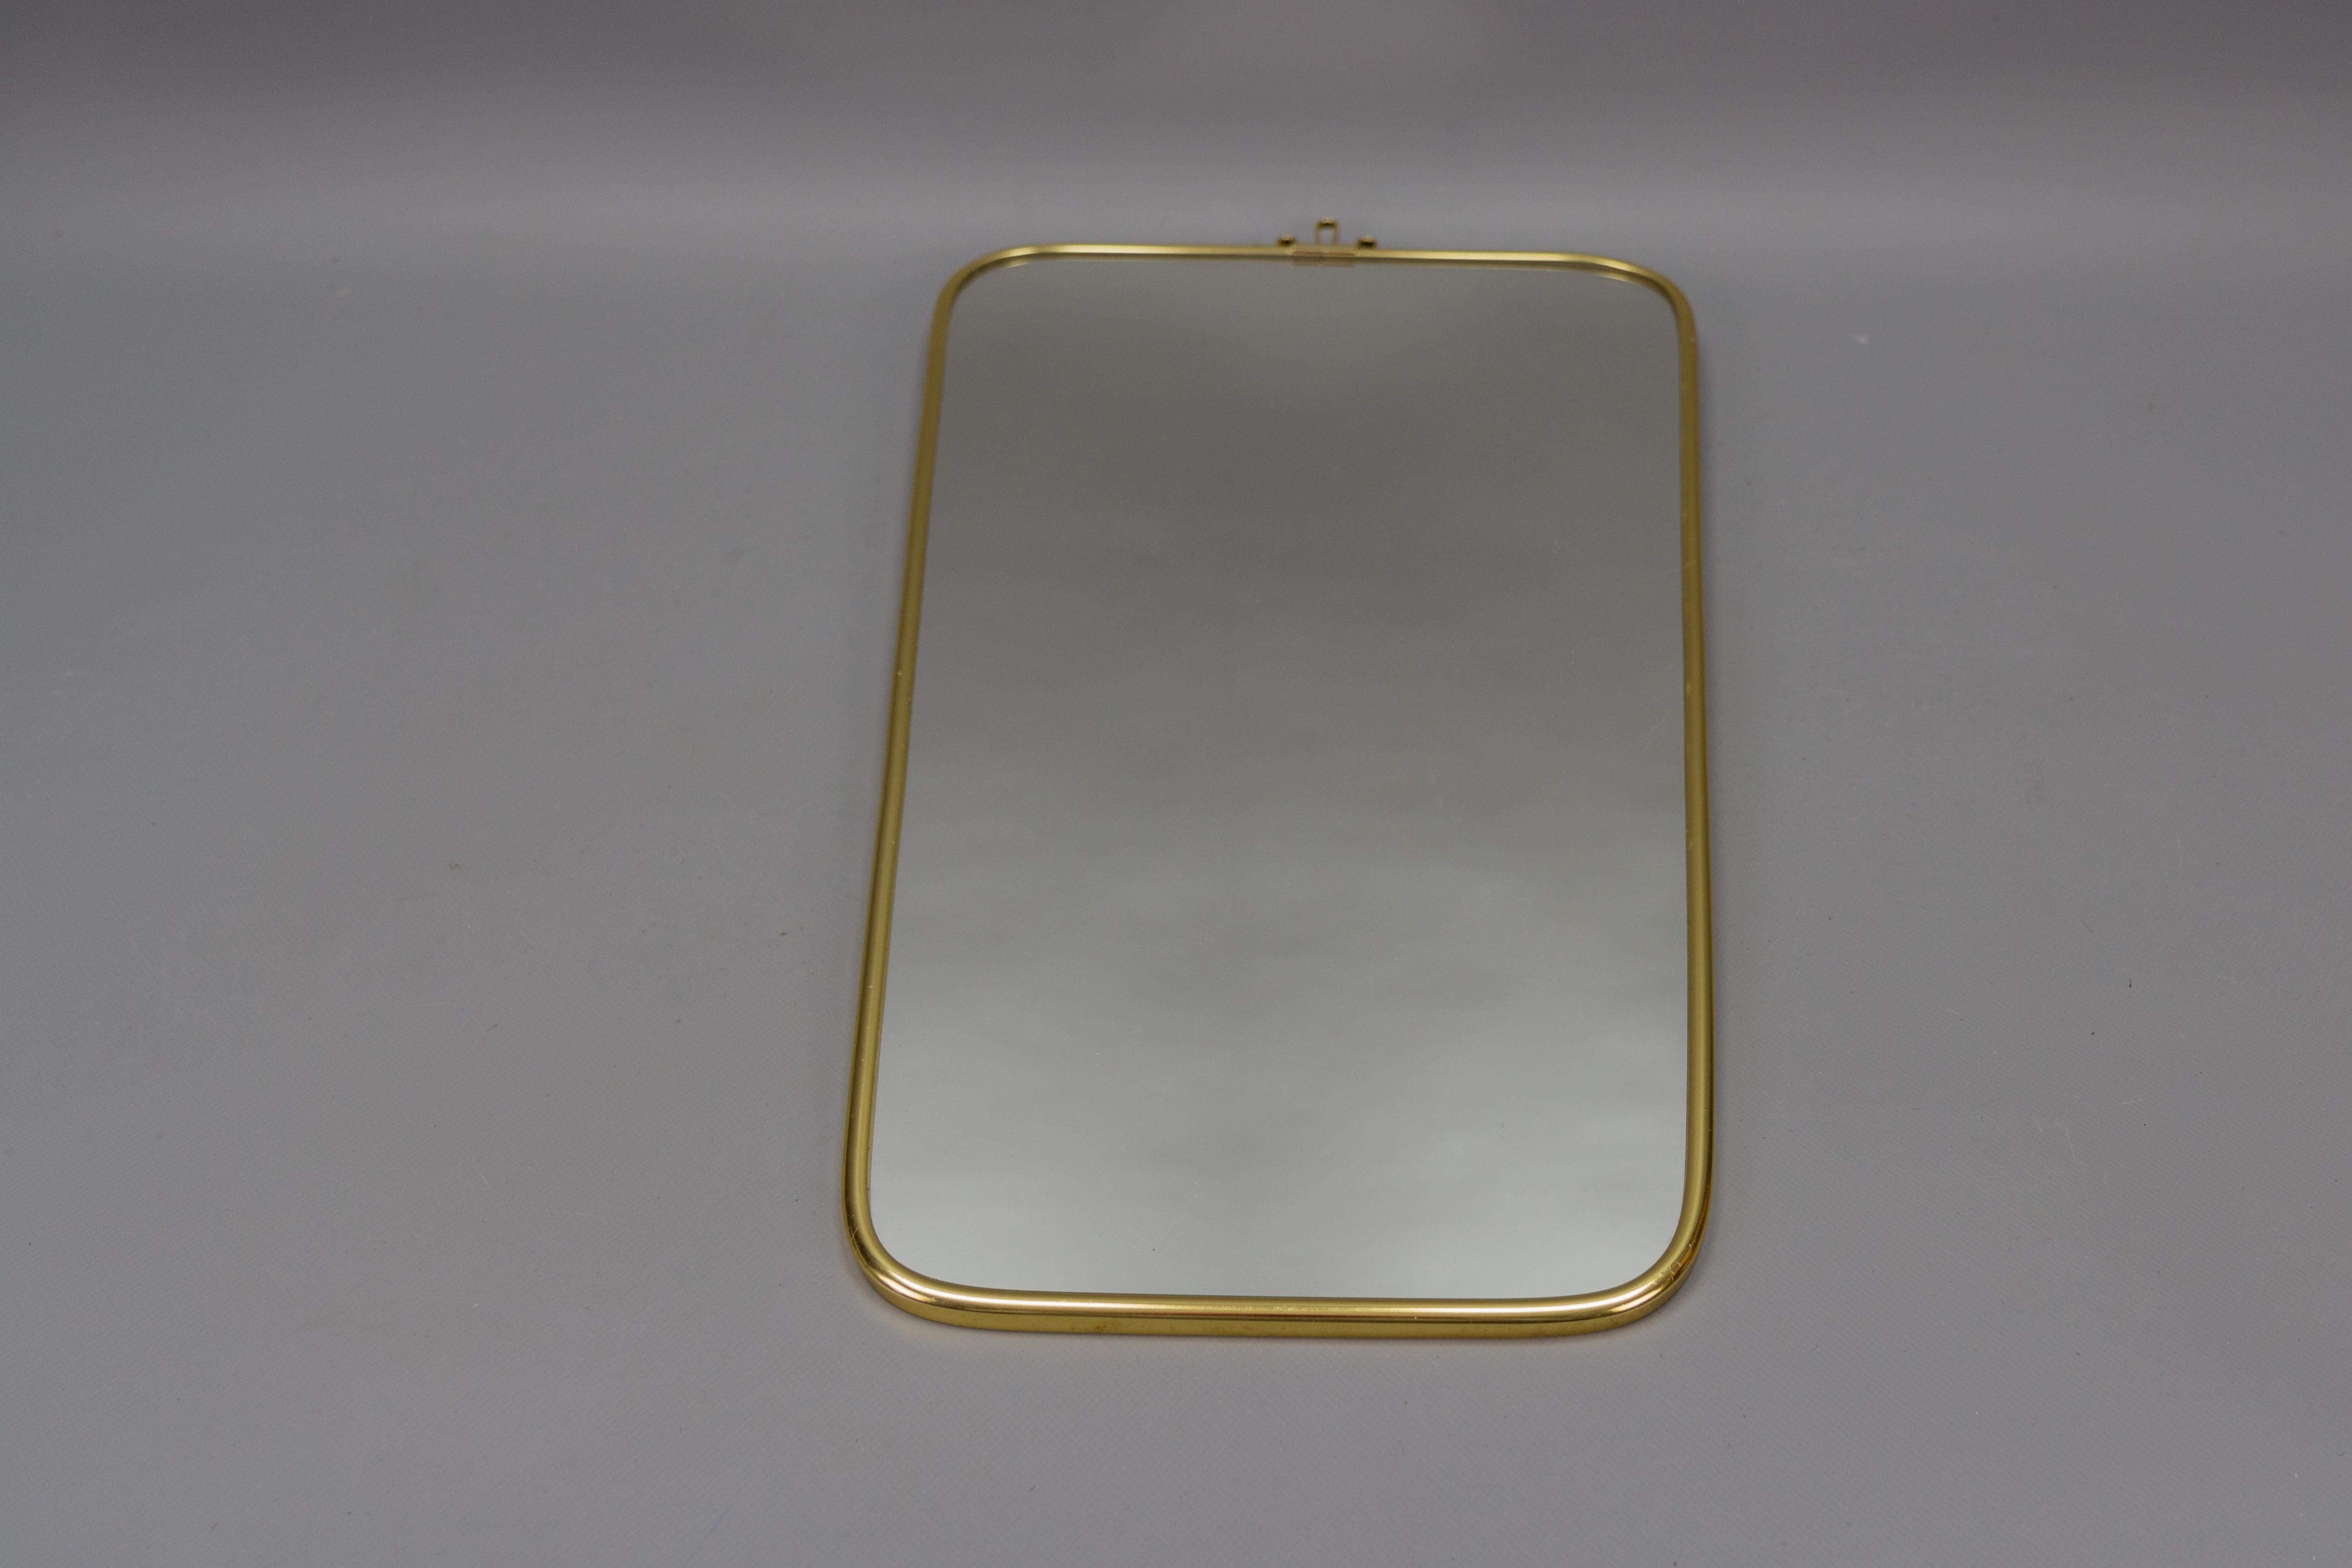 German Mid-Century Modern Brass Frame Wall Mirror by Lenzgold, 1960s For Sale 9